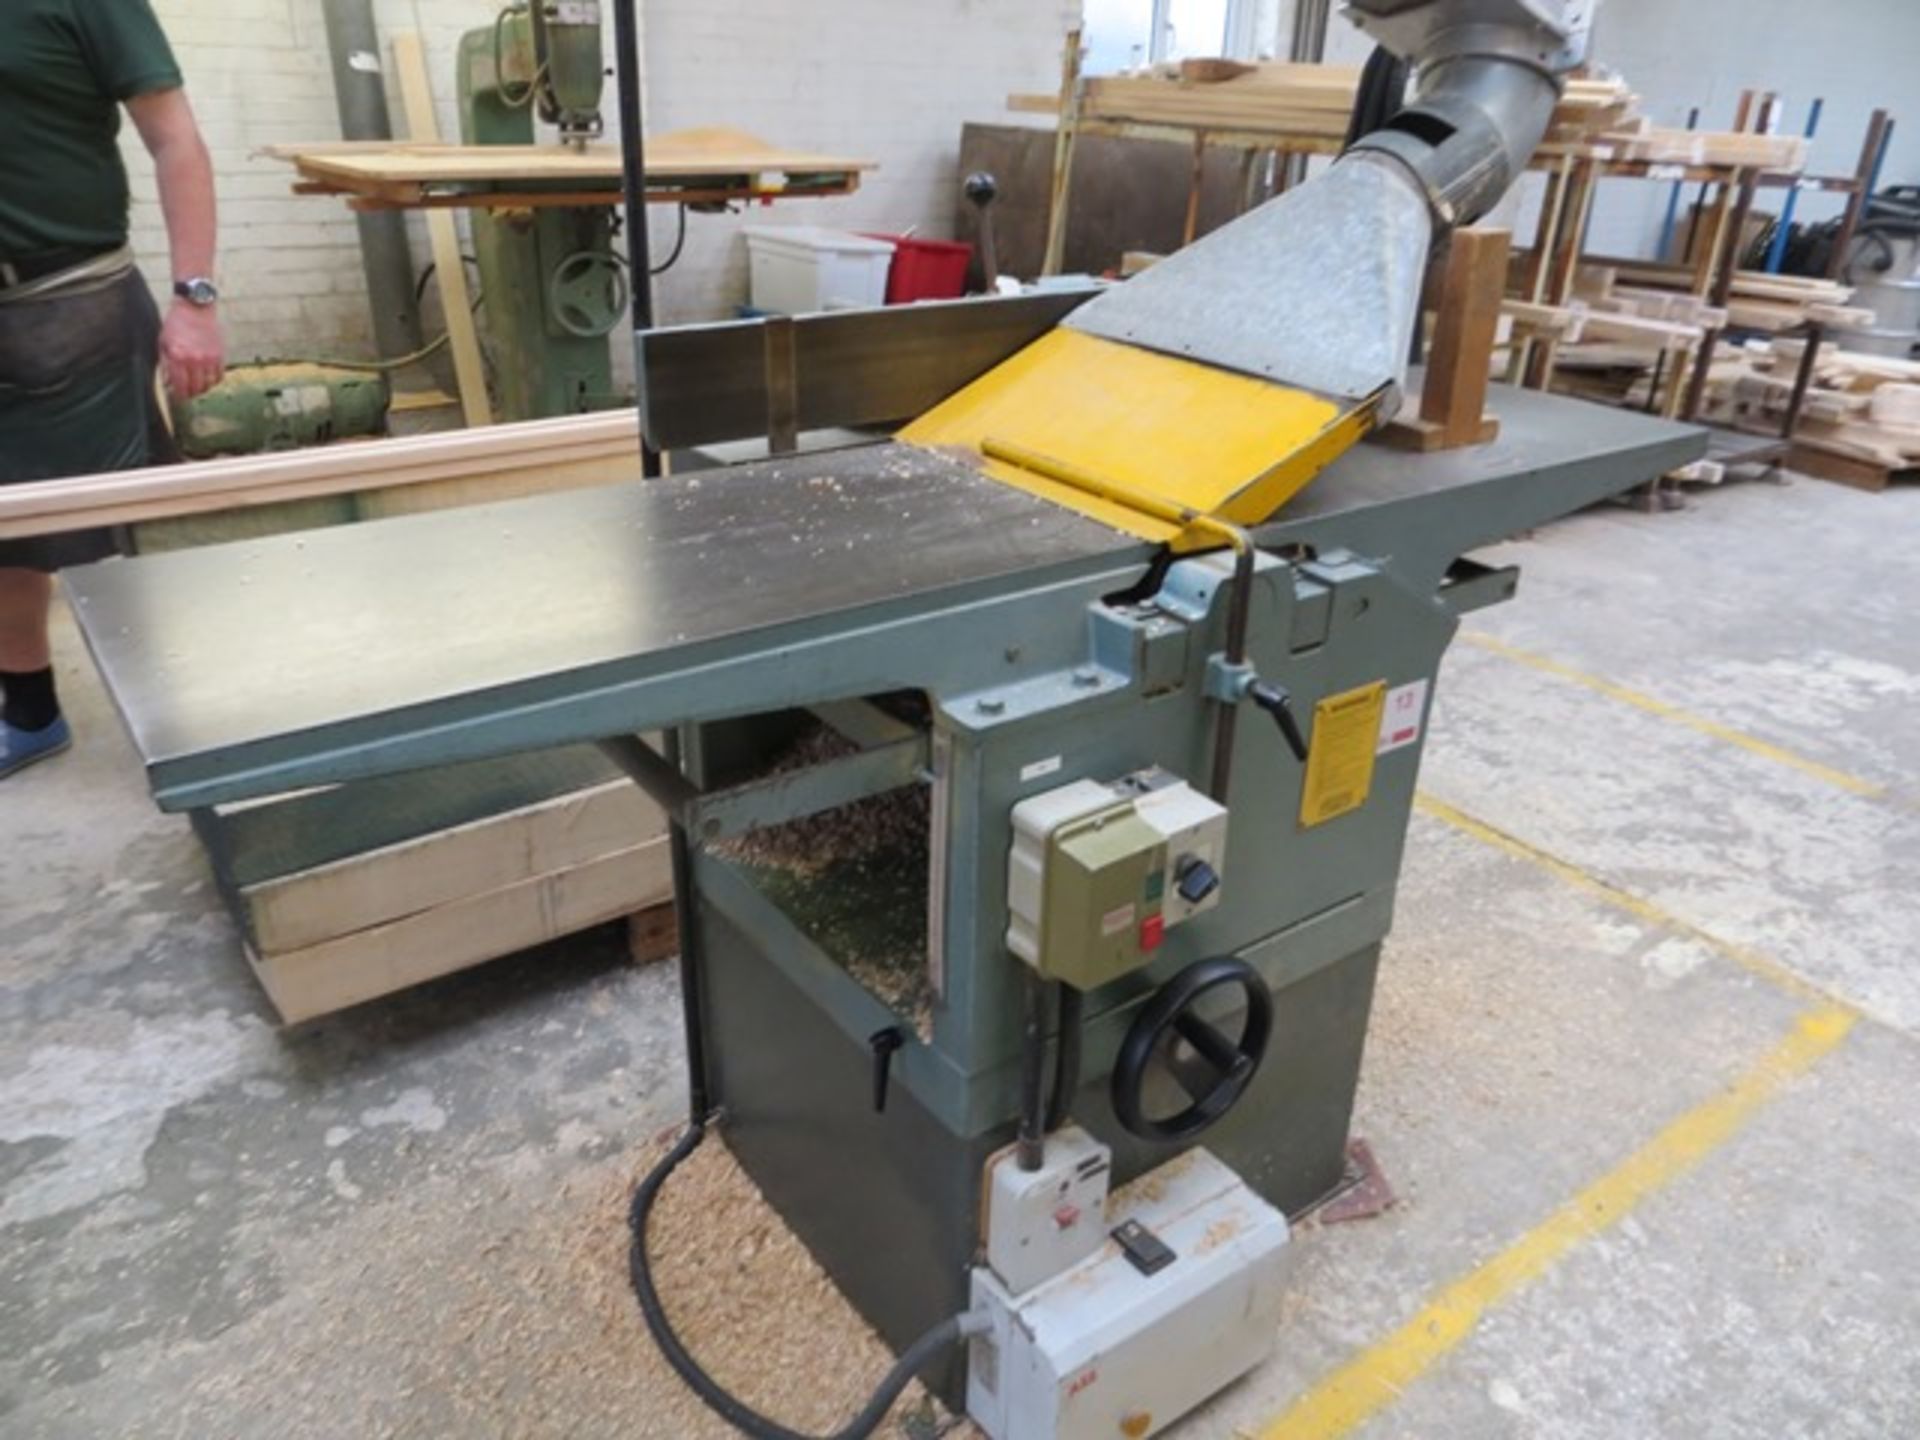 Sedgwick planer thicknessing machine. [NB: this item has no CE marking. The purchaser is required to